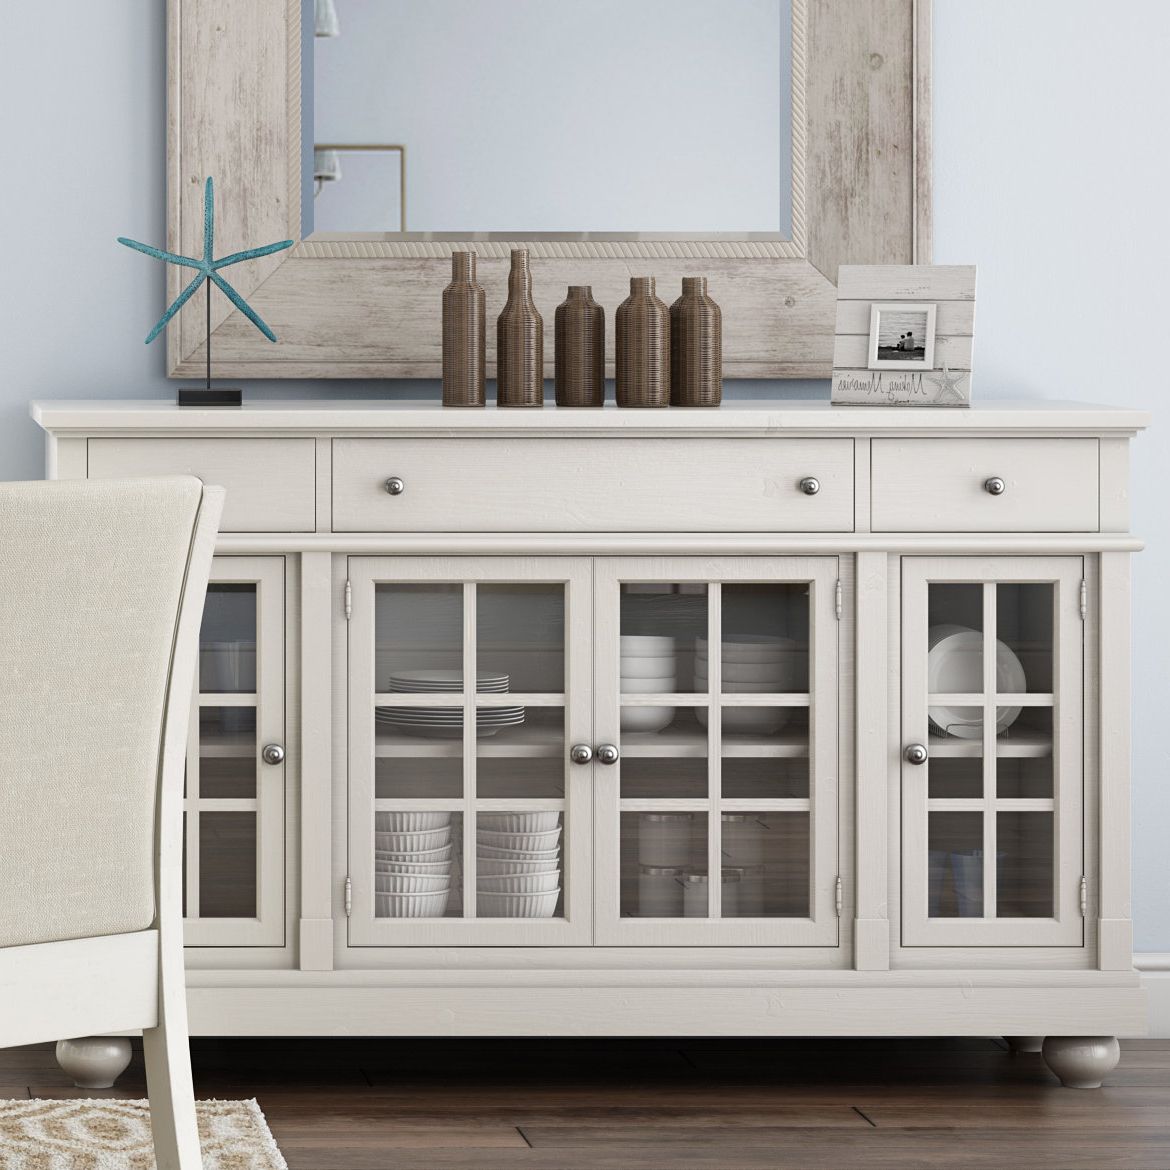 Farmhouse & Rustic Sideboards & Buffets | Birch Lane Intended For Chicoree Charlena Sideboards (Gallery 6 of 20)